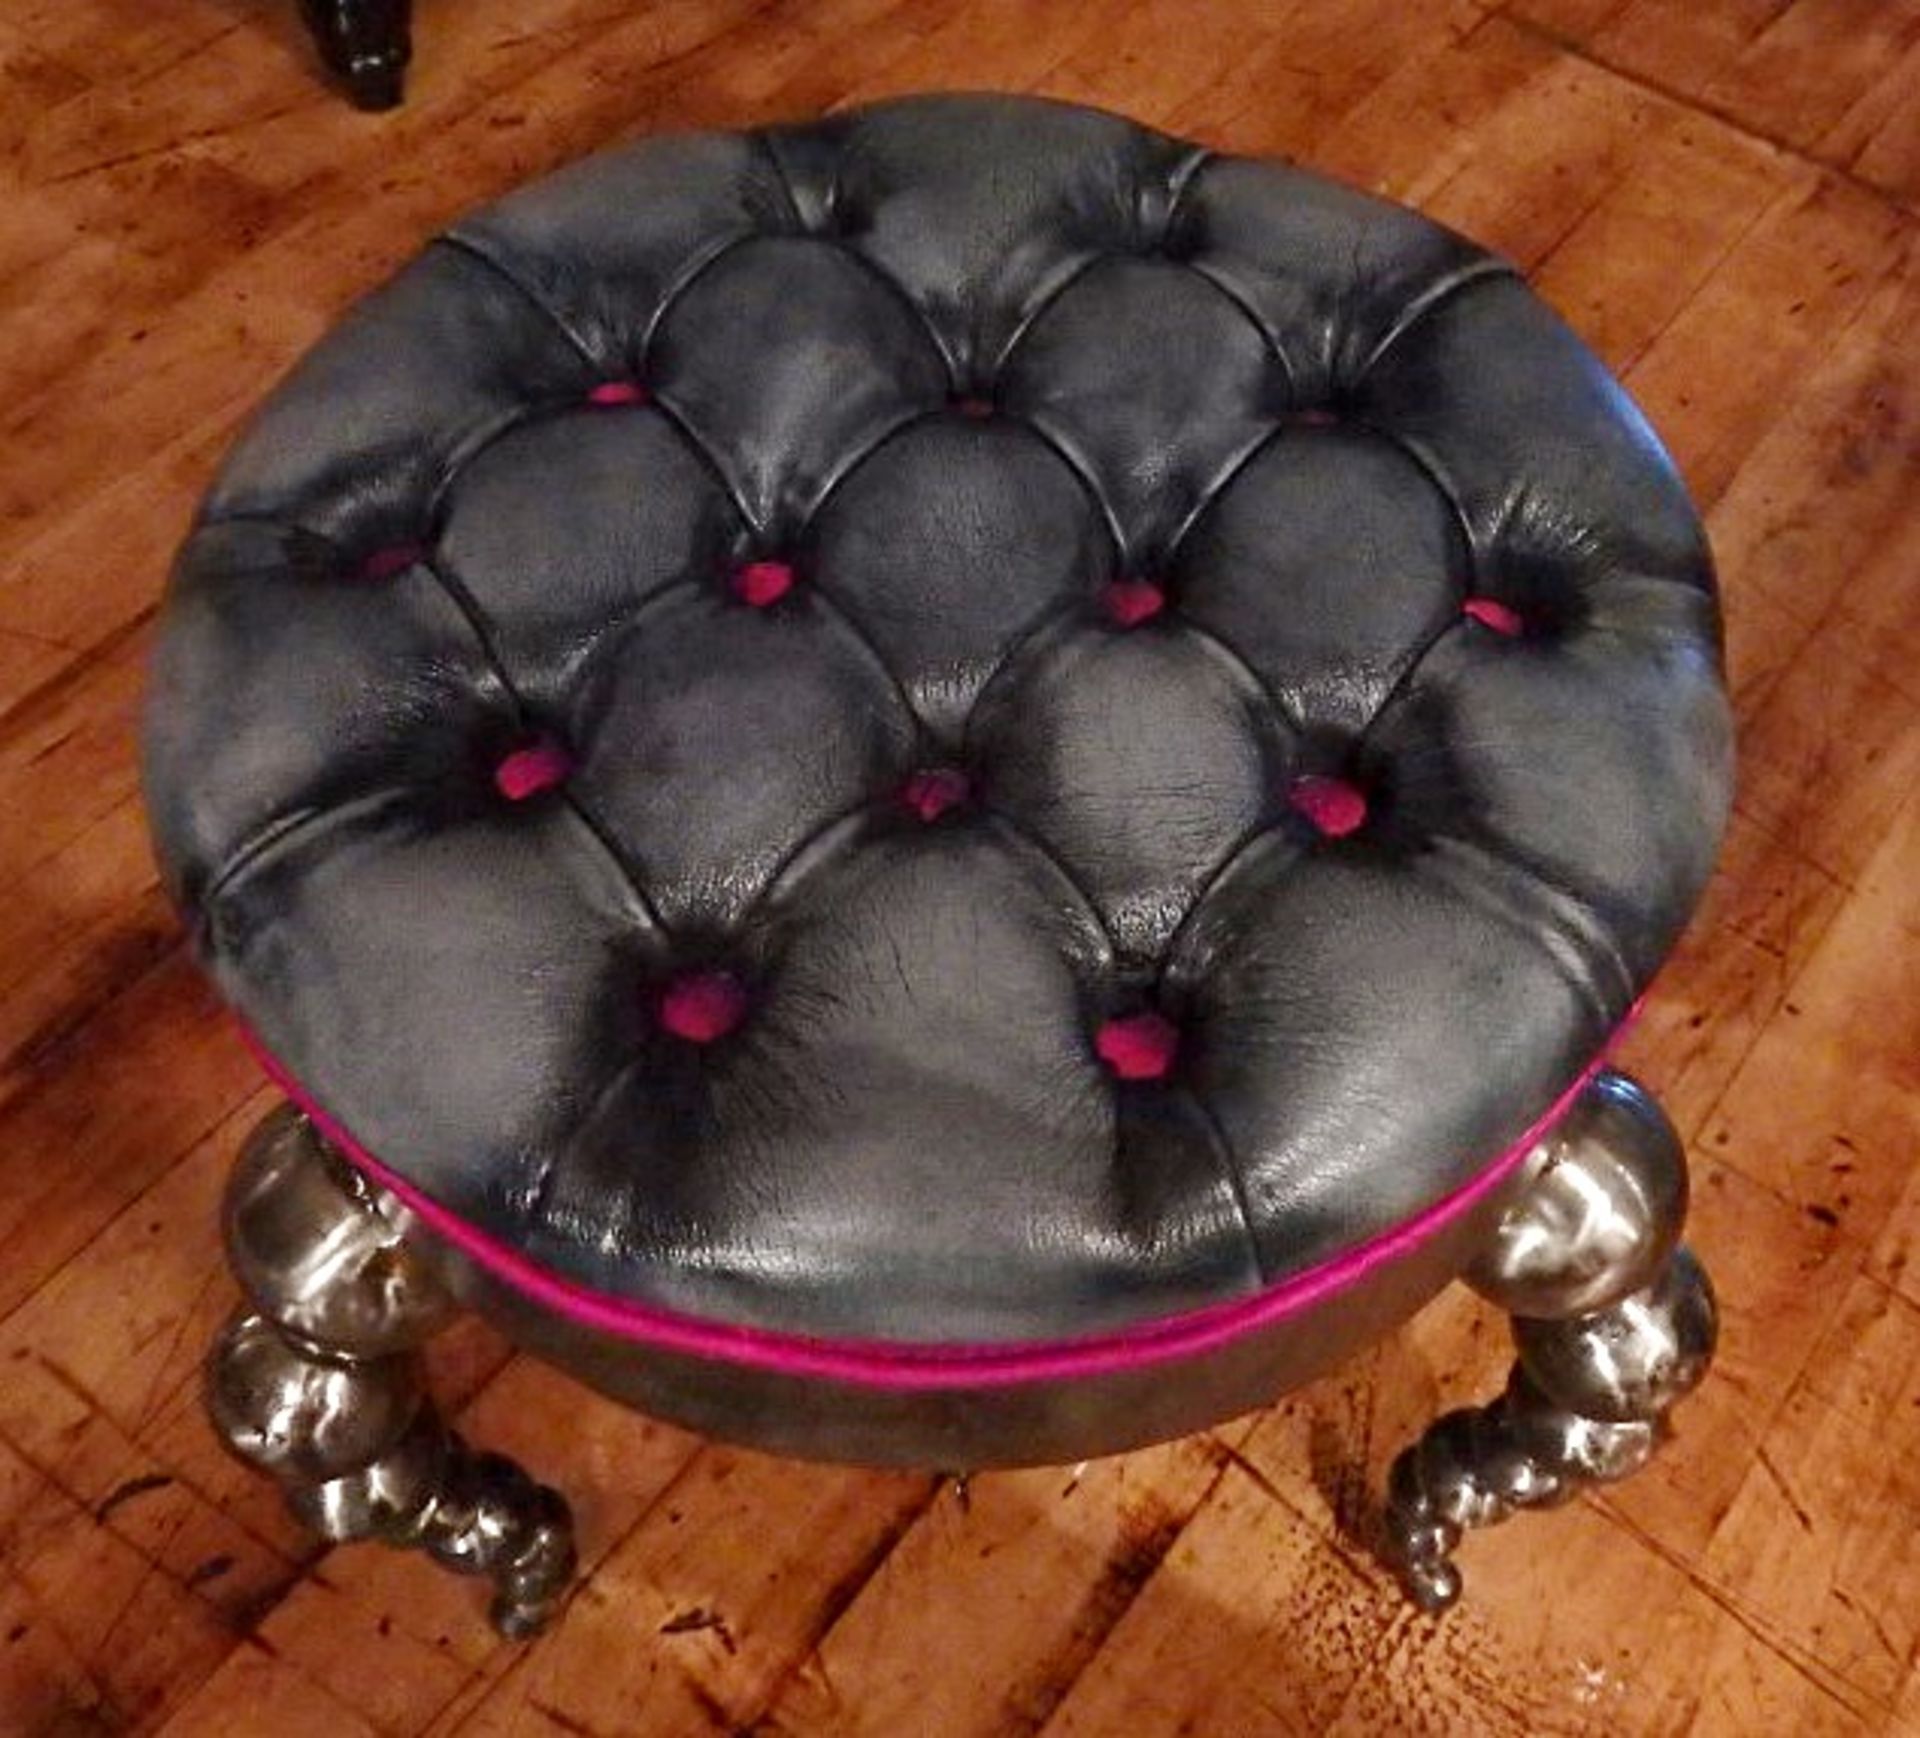 1 x Bespoke Handcrafted Chair - Unique Metal Framework With Leather Upholstered Cushion - Grey - - Image 2 of 3